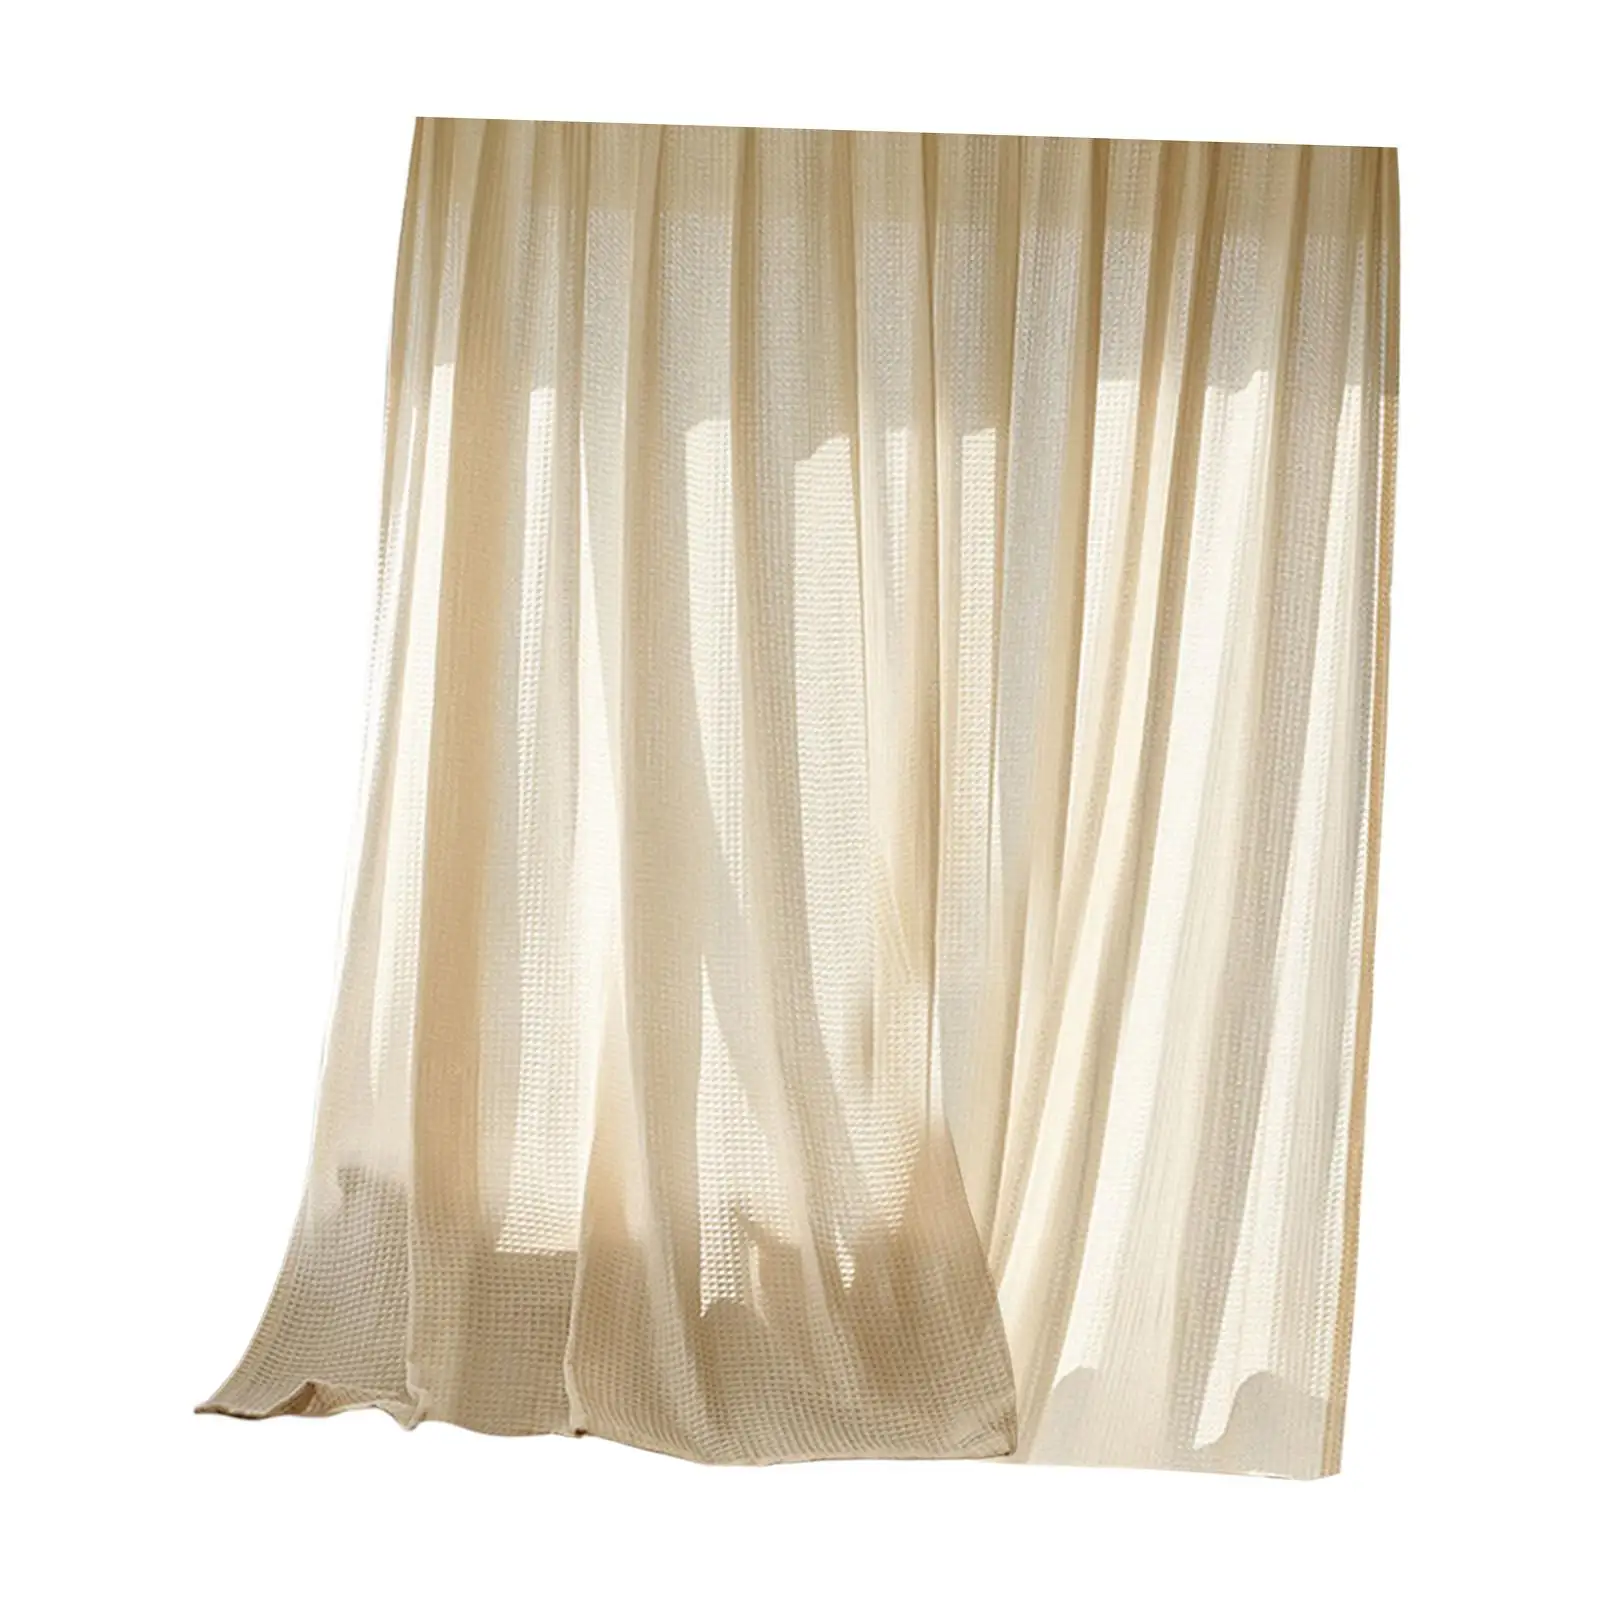 Lightweight Breathable Drapes Door Curtain Window Curtain Elegant Panels for Bedroom Study Living Room Office Decor